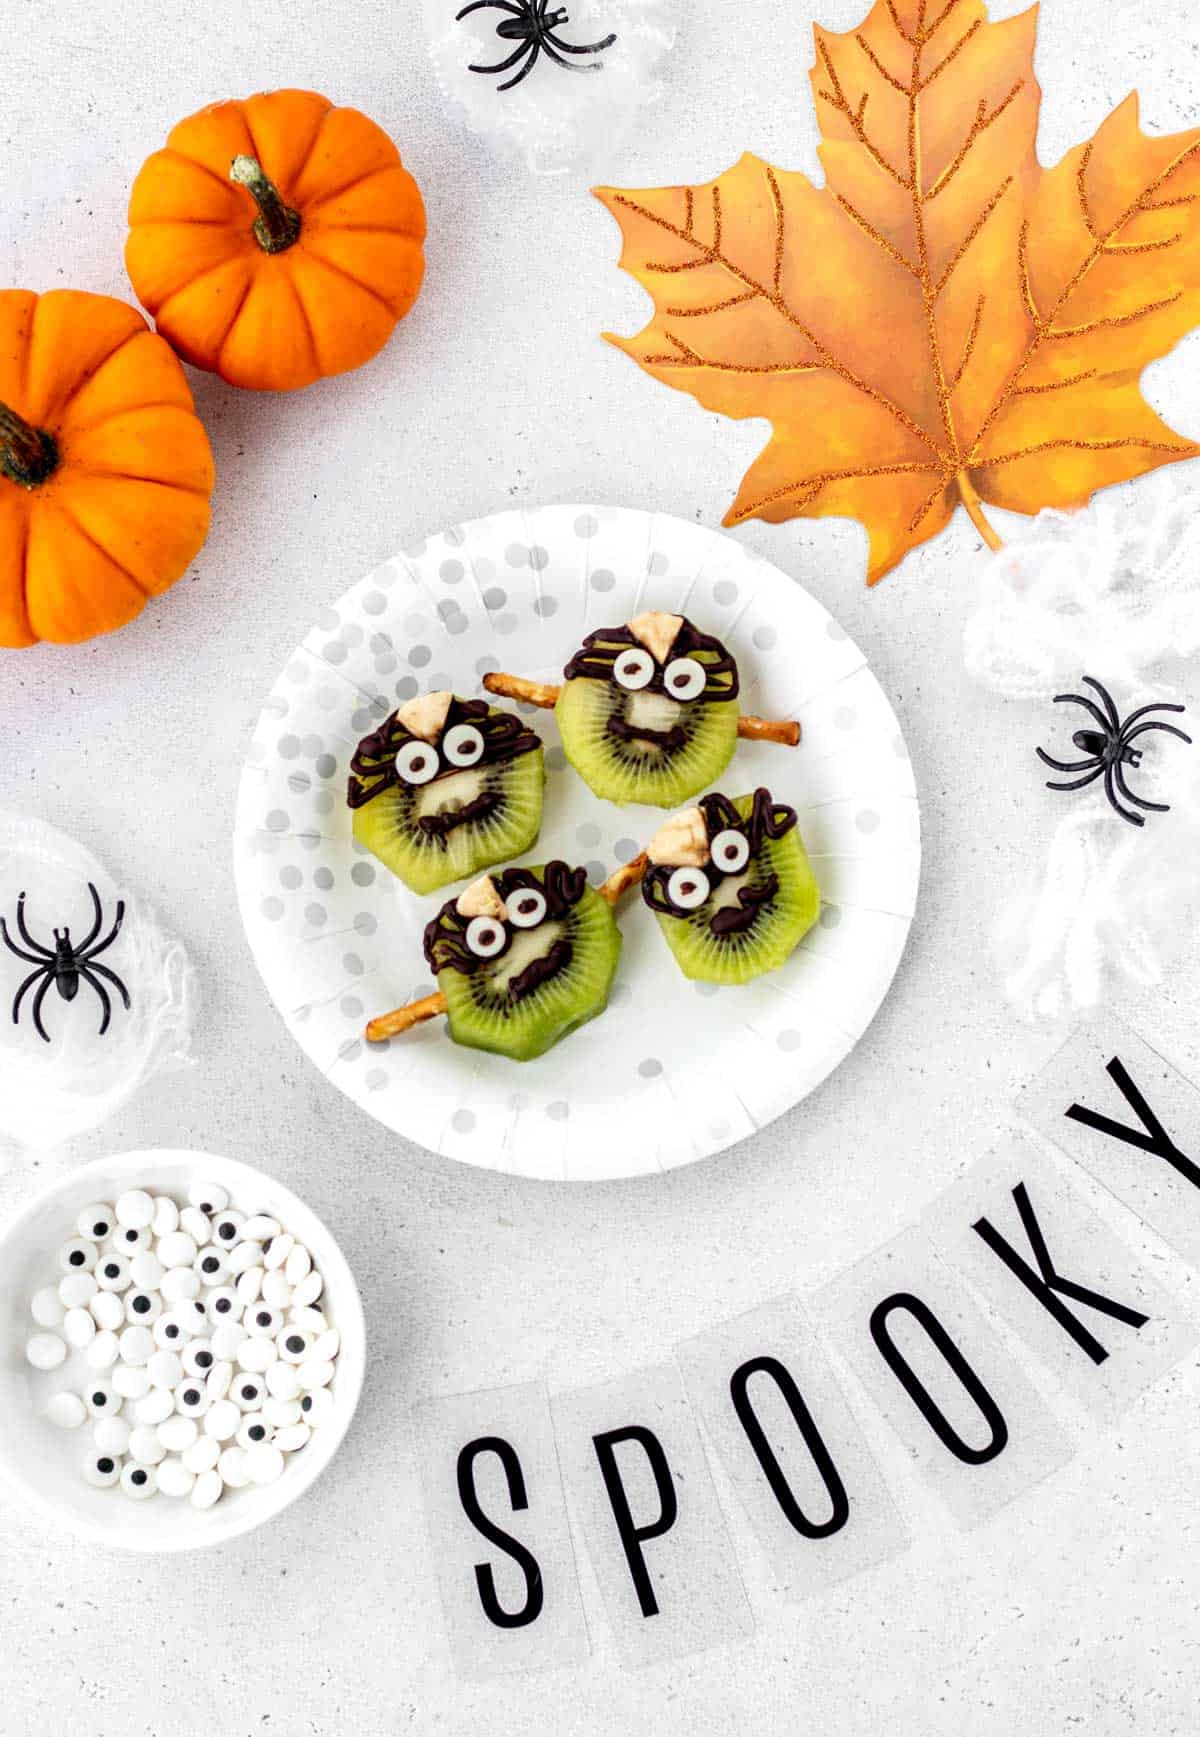 Four Frankenstein kiwis on a plate with Halloween decorations.